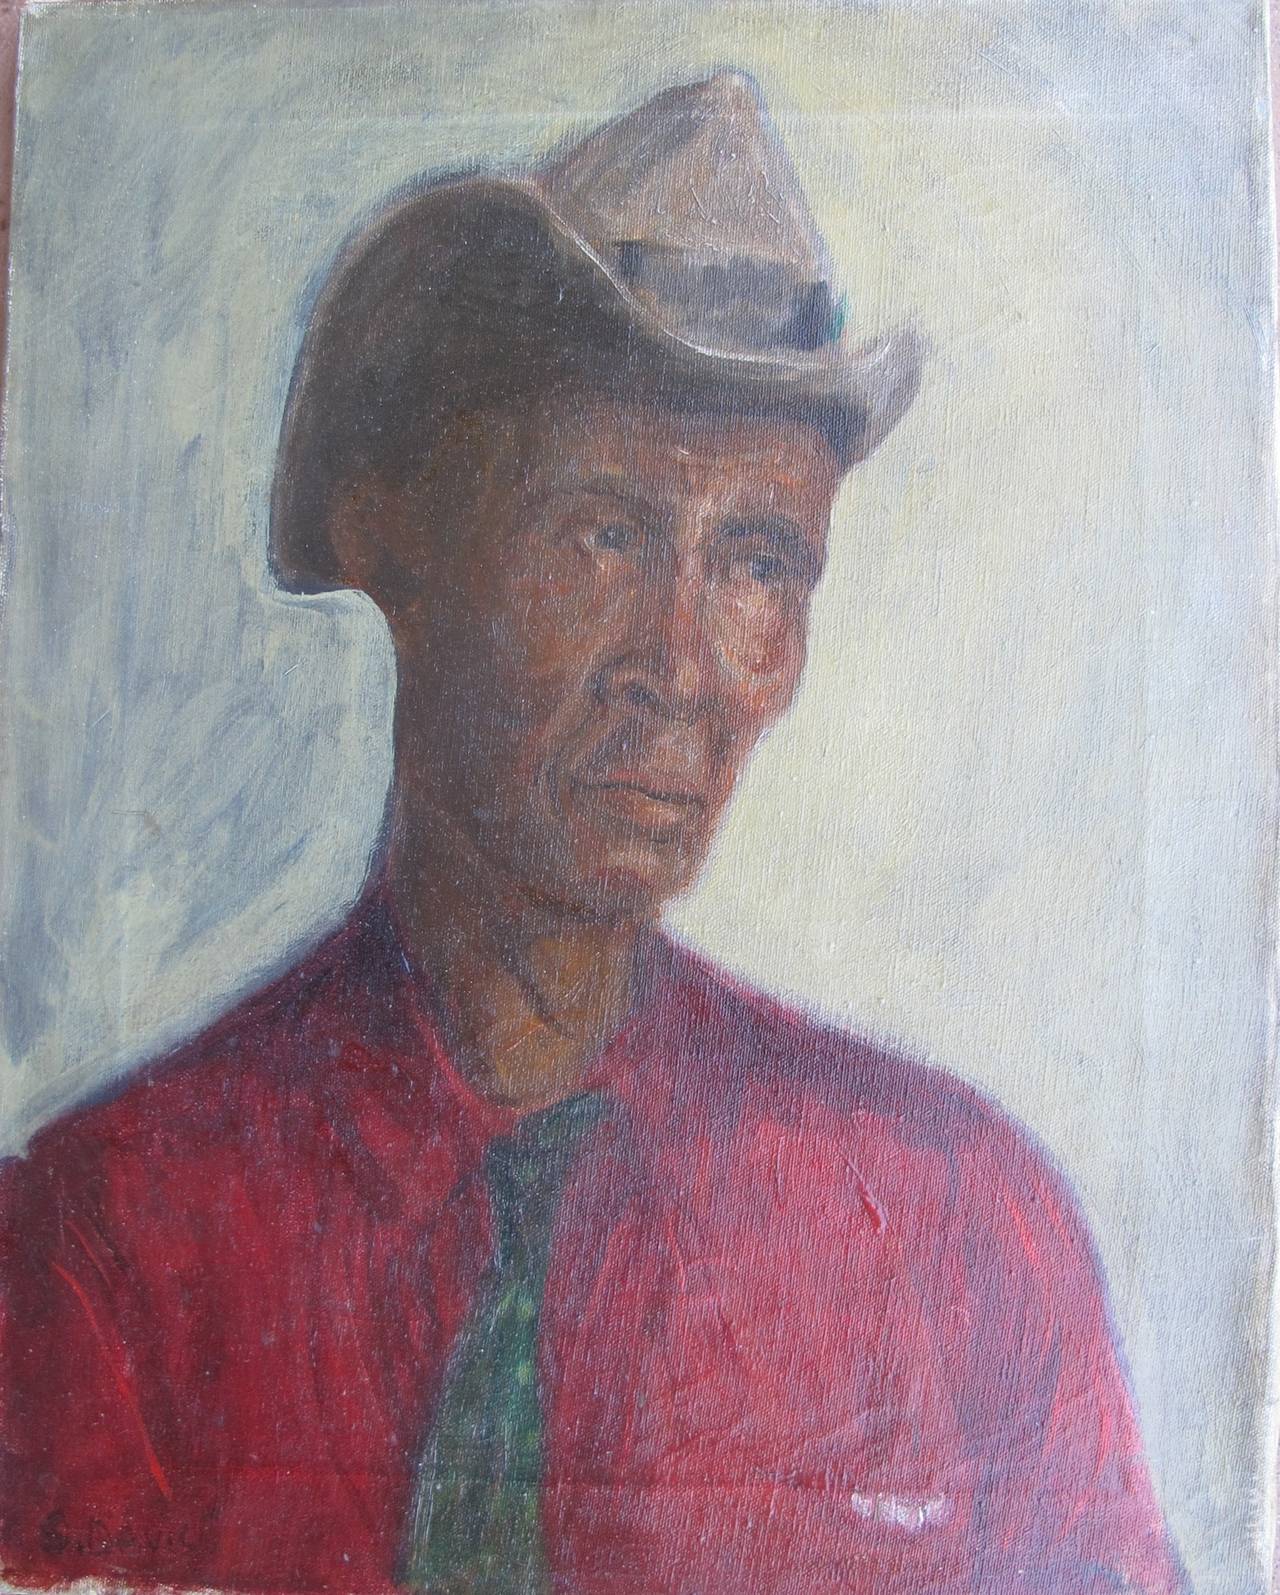 1930s portrait of man in cap. Oil on canvas.